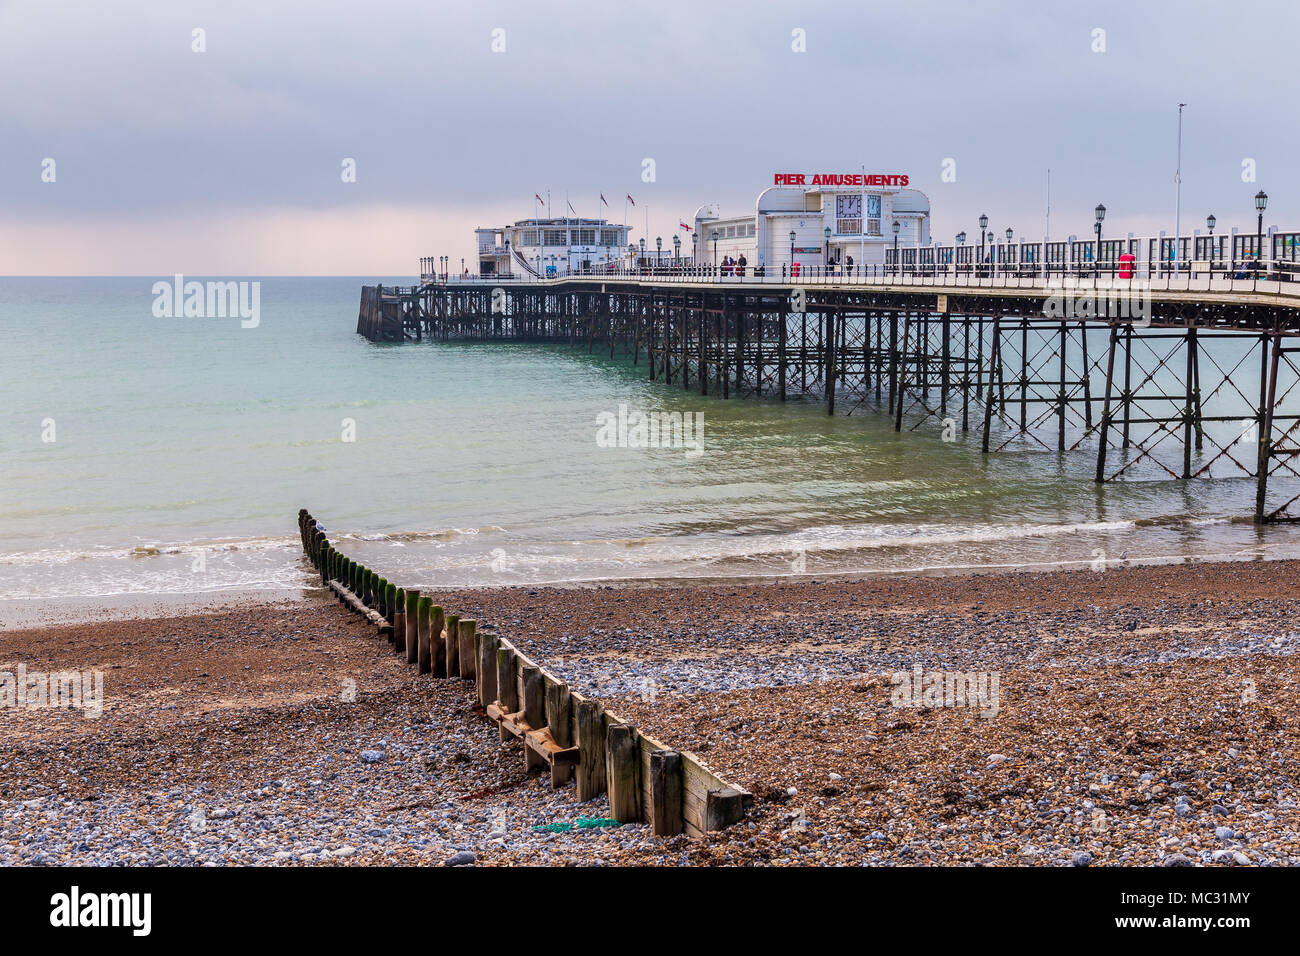 Worthing, West Sussex, England, UK - October 25, 2016: The pier seen from Worthing beach with grey clouds over the sea Stock Photo